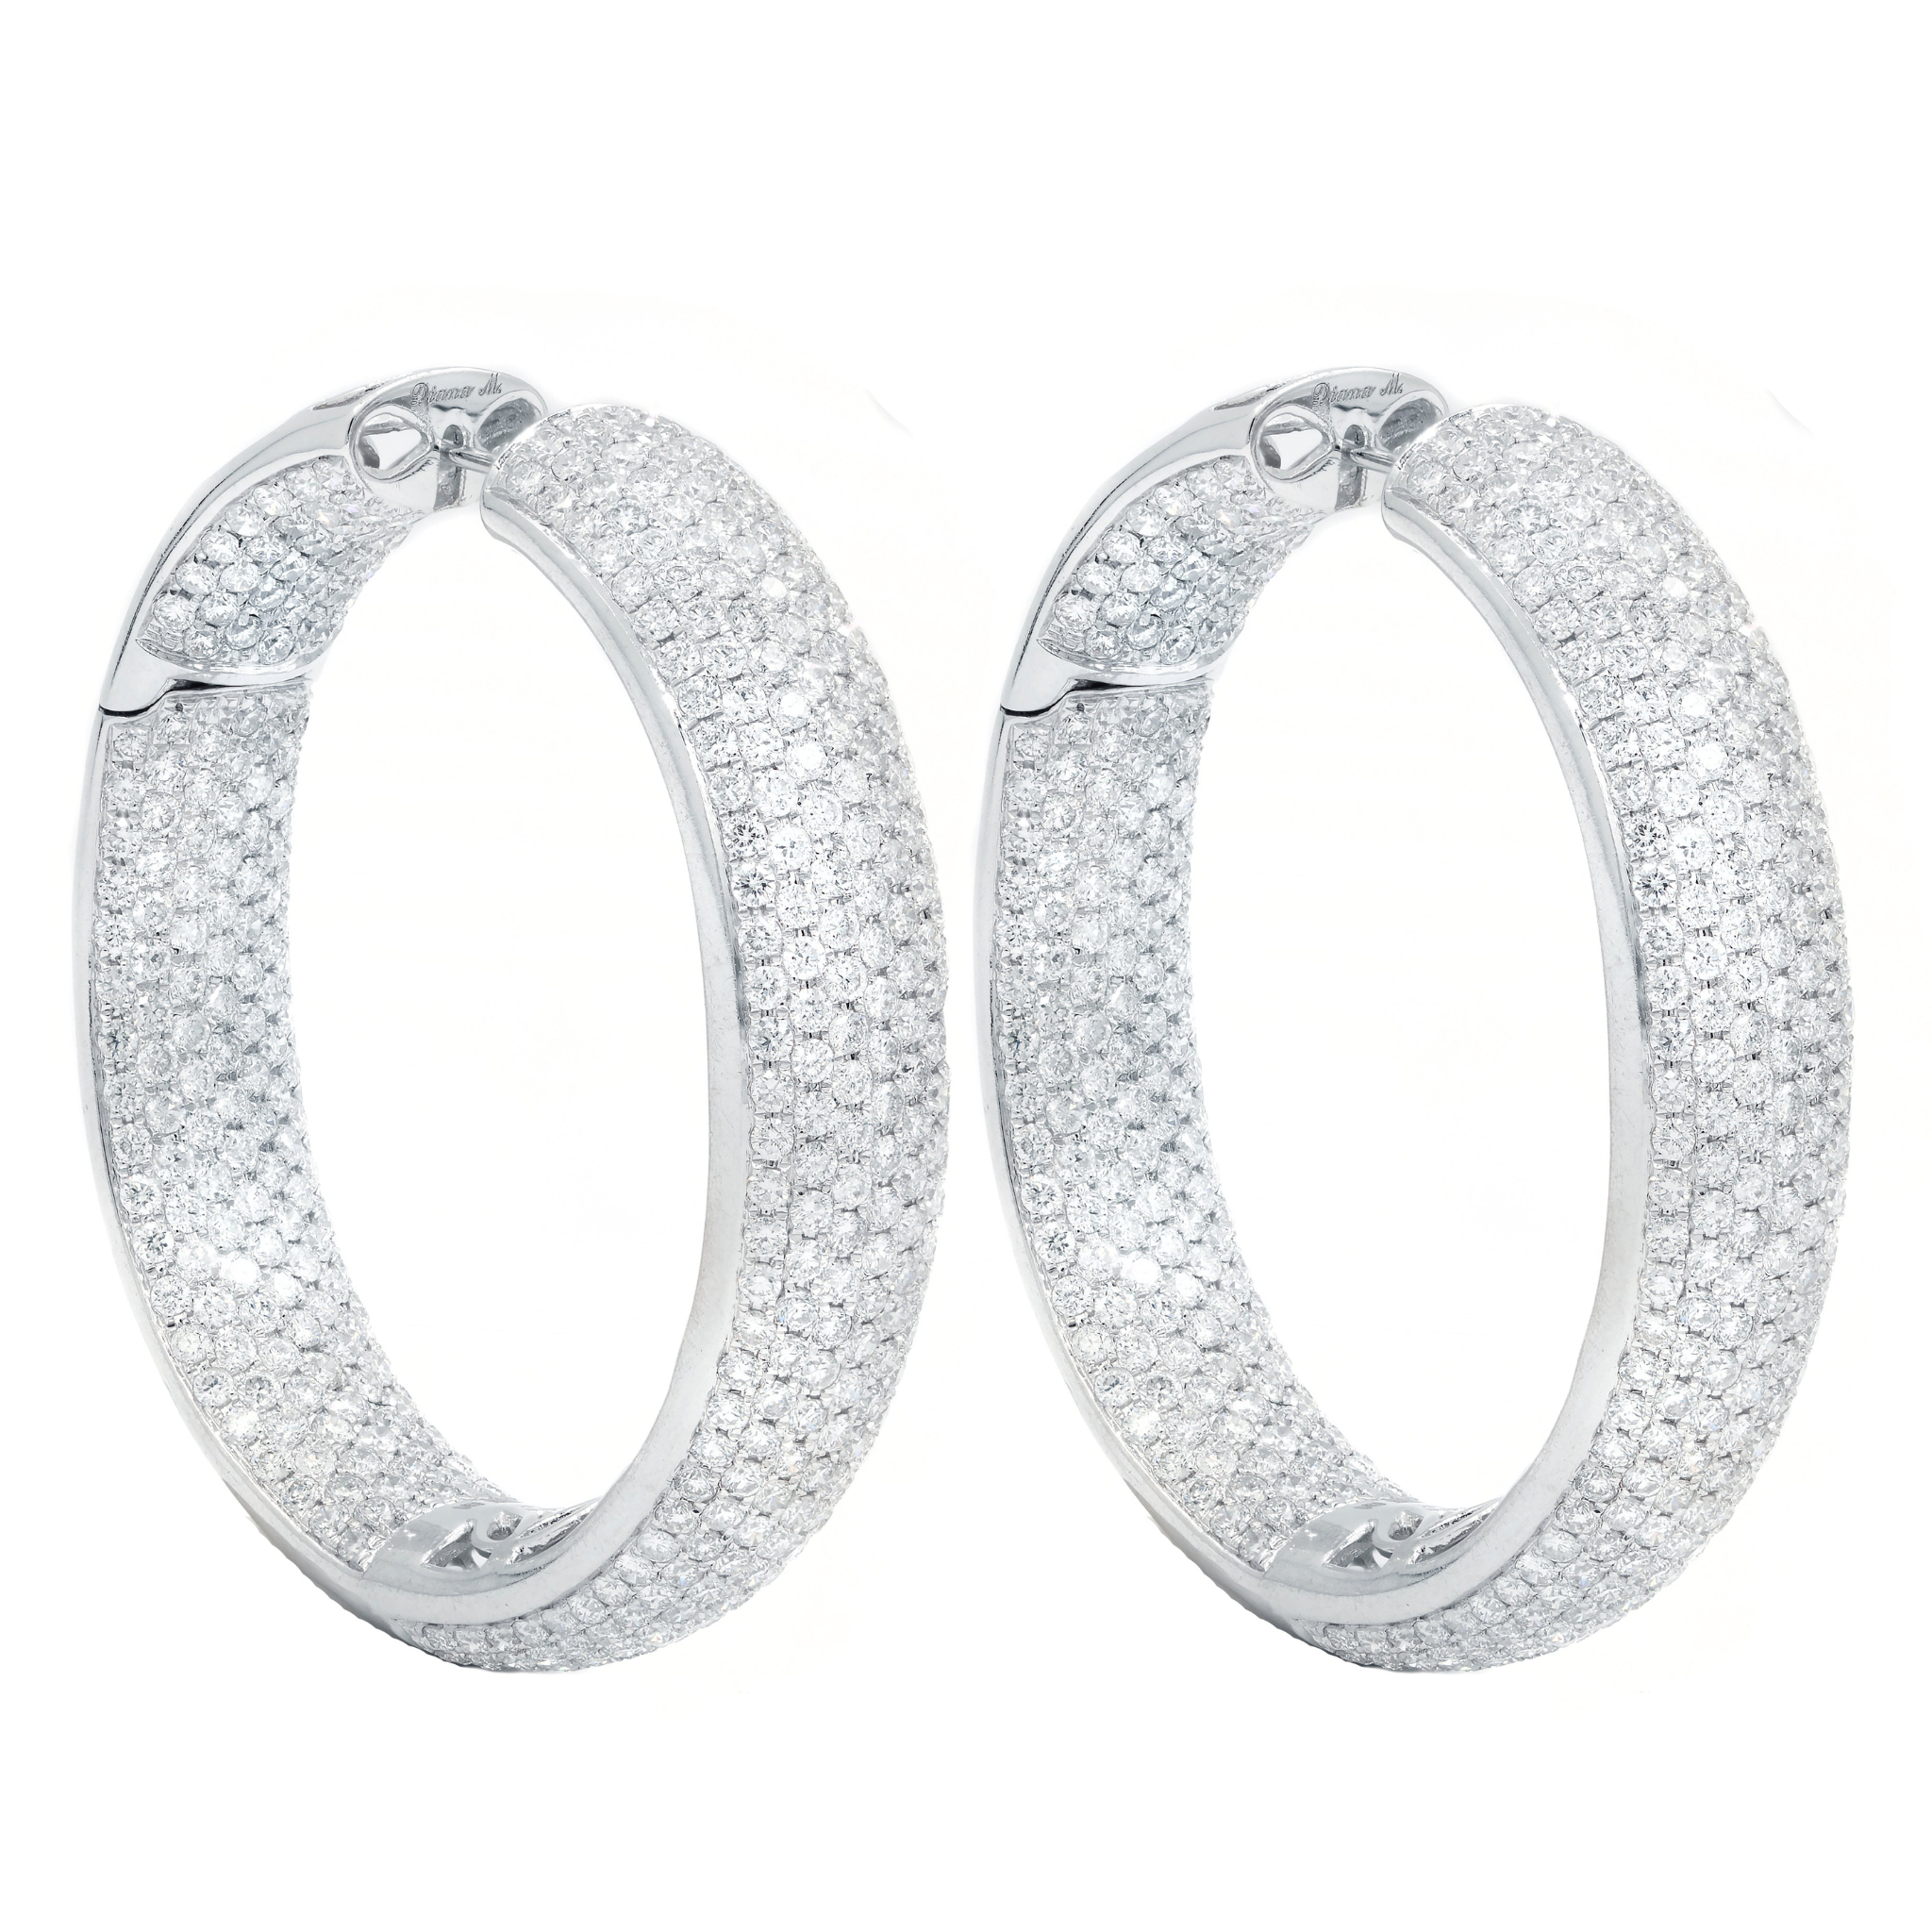 18 Kt White Gold Hoop Earrings with 5 Rows of 16.75 cts.jpg